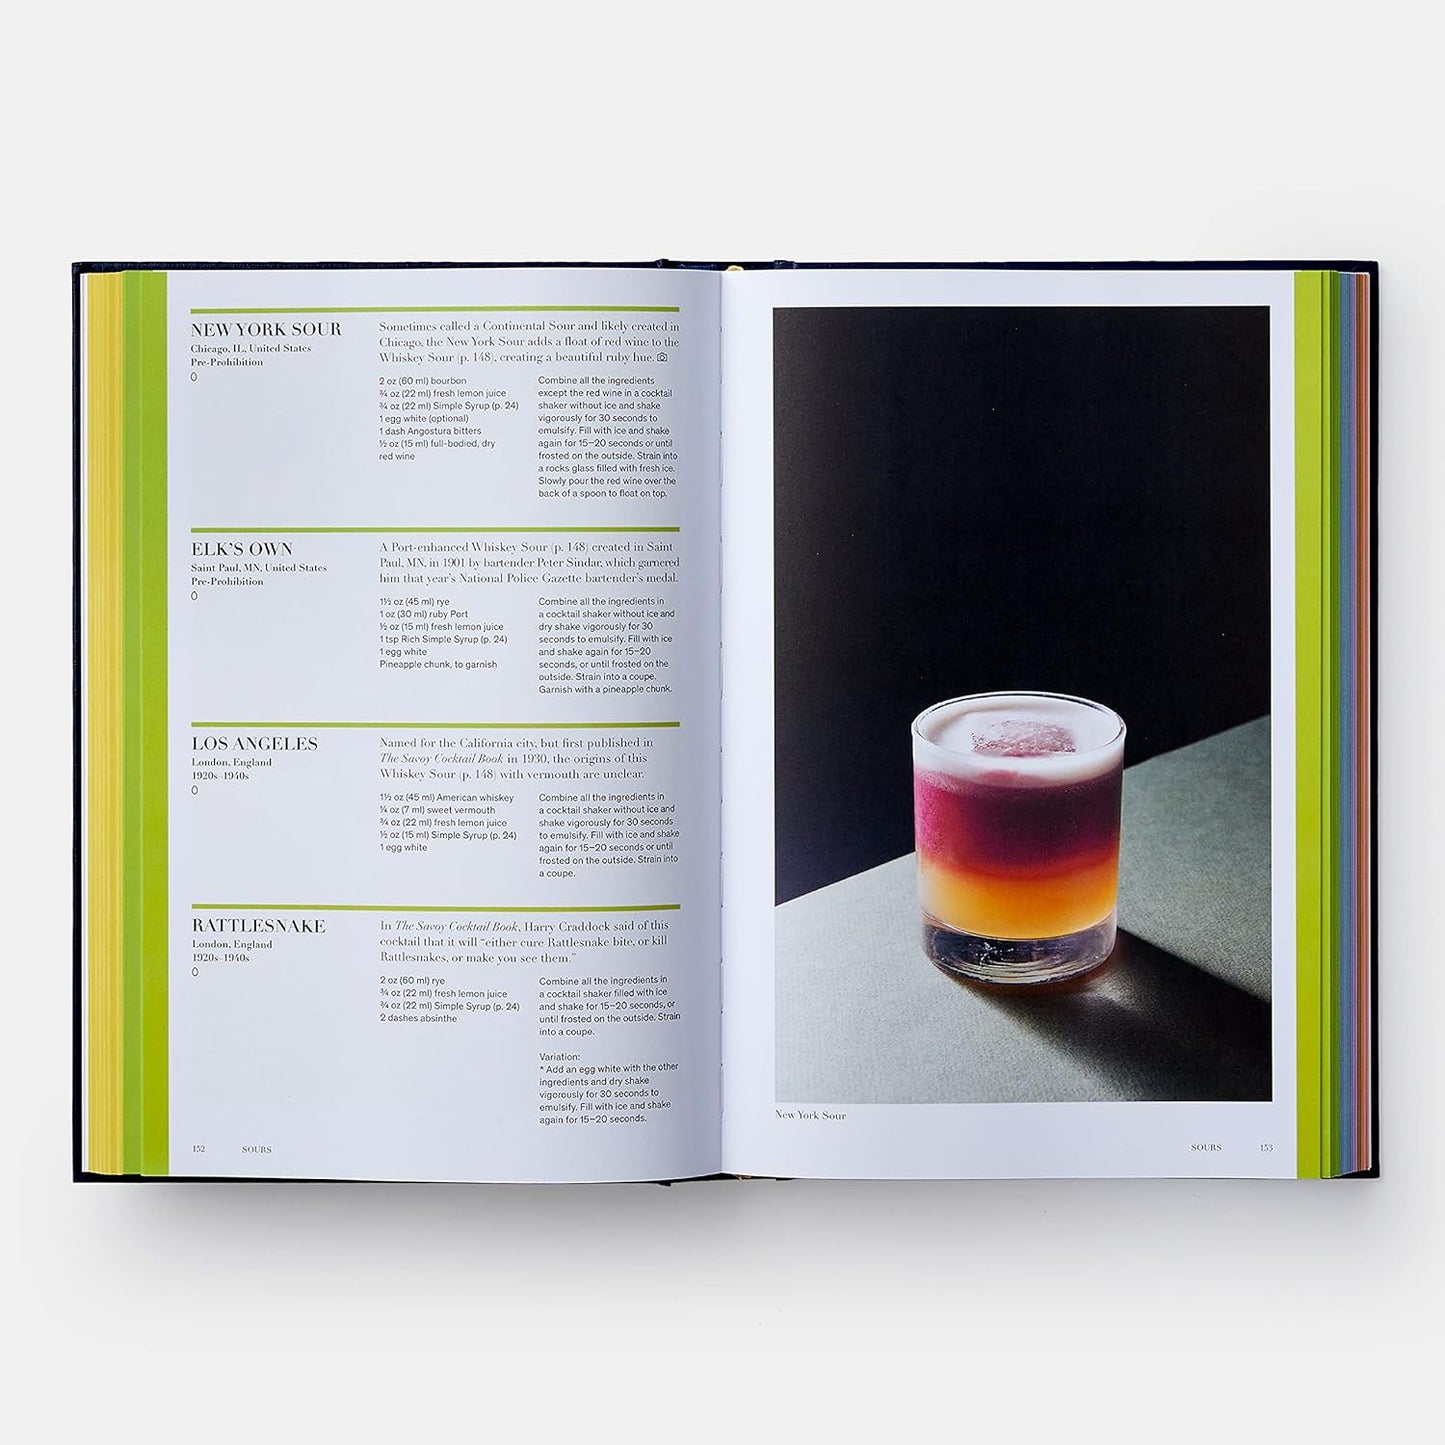 Spirited: Cocktails From Around the World. The ultimate guide to cocktails for every home and host – a luxurious, fully-illustrated, global celebration of classic and cutting-edge cocktails, packed with fascinating historical detail as well as more than 600 fail-safe recipes.